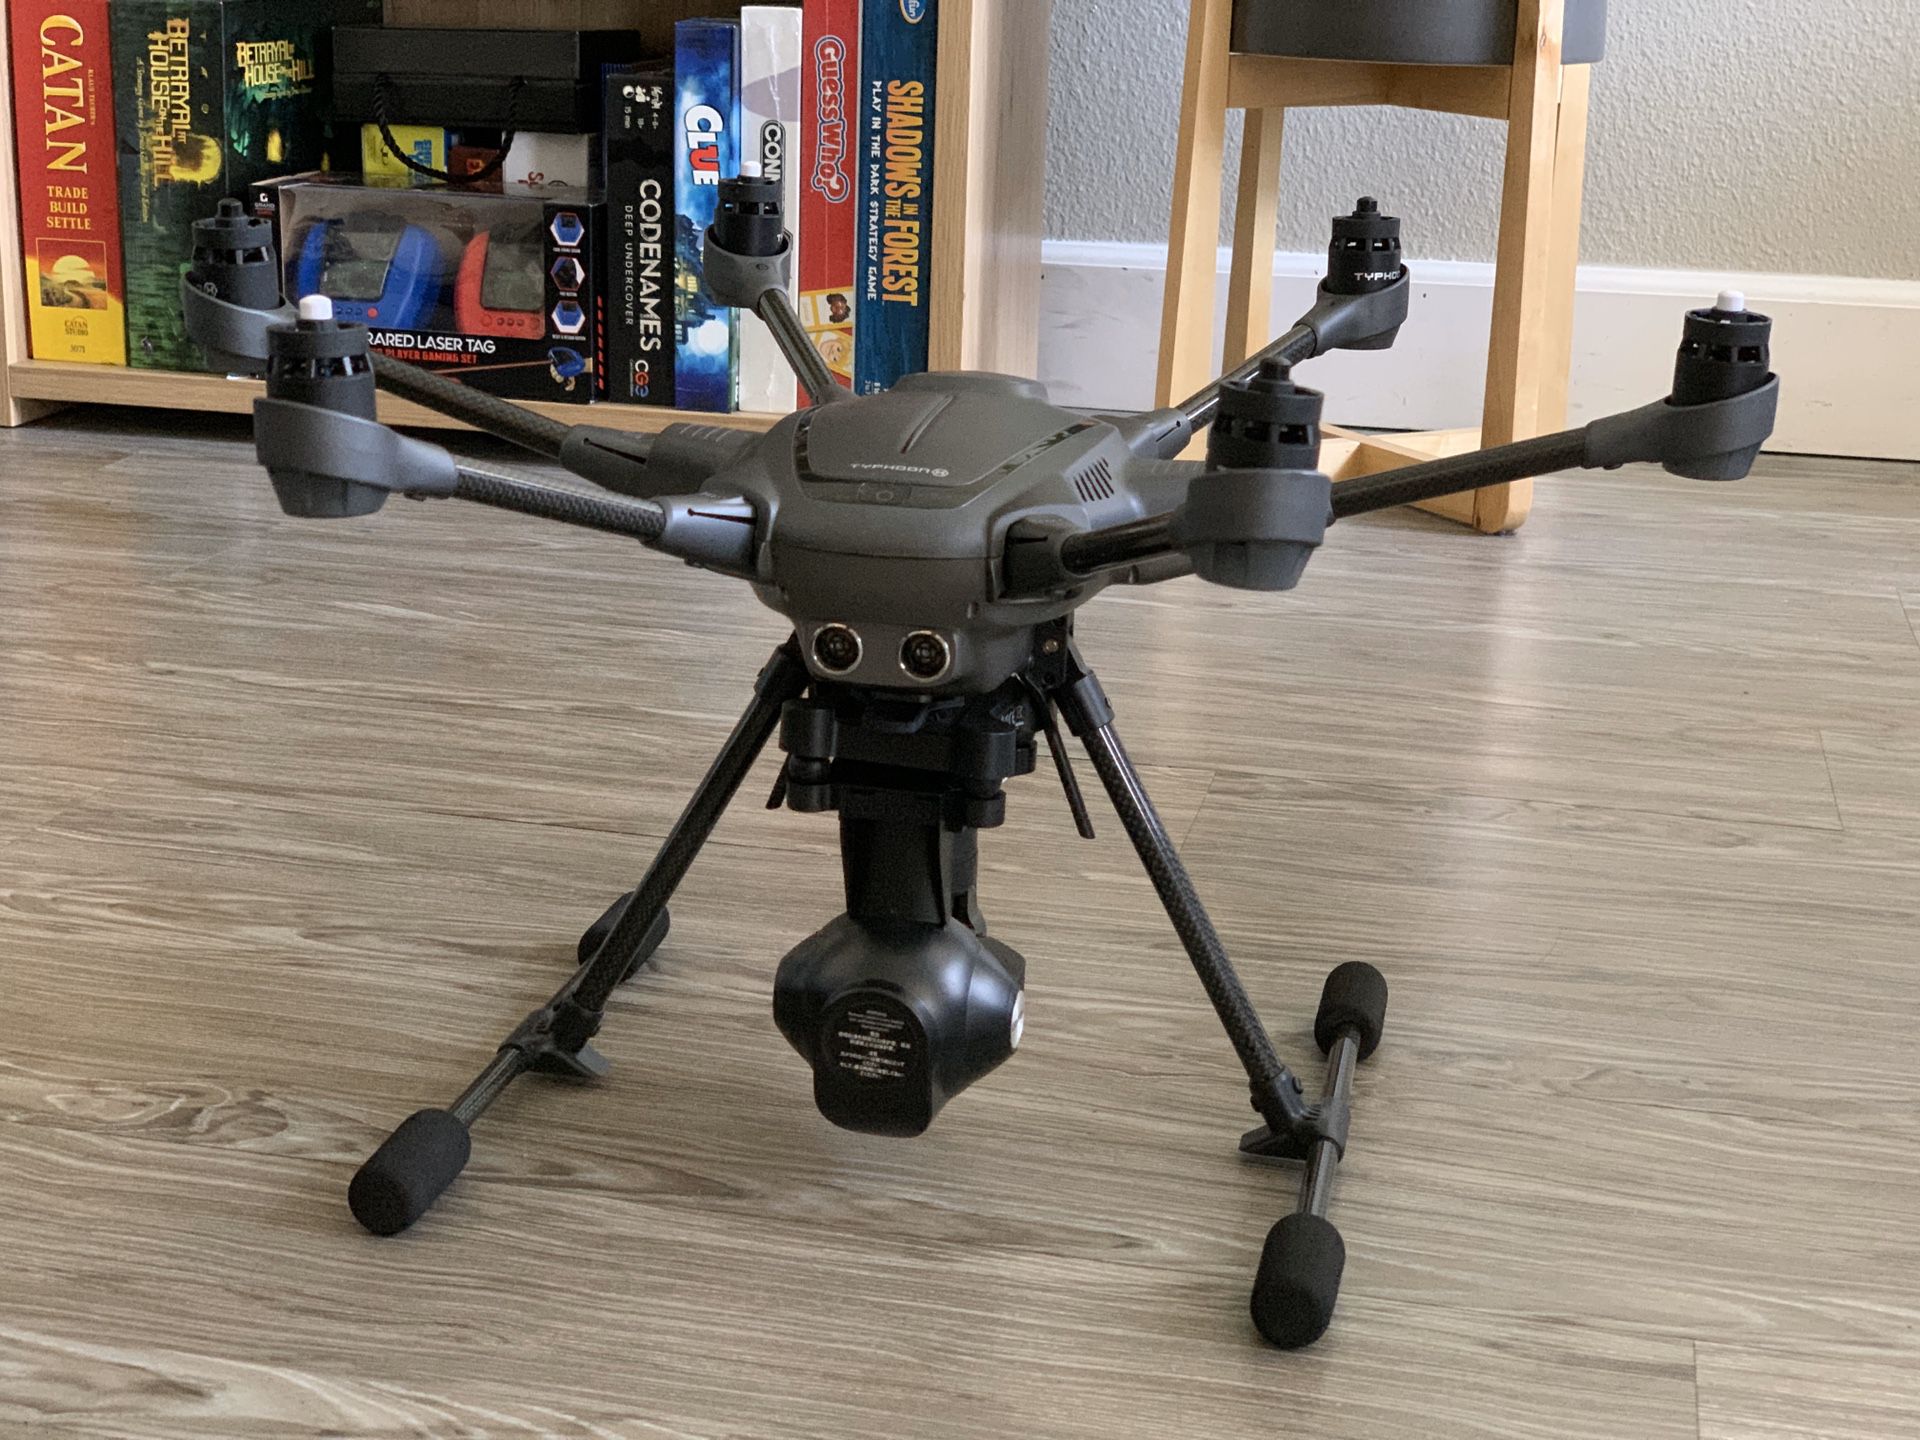 Yuneec Typhoon H 4K Hexacopter Drone w/ case